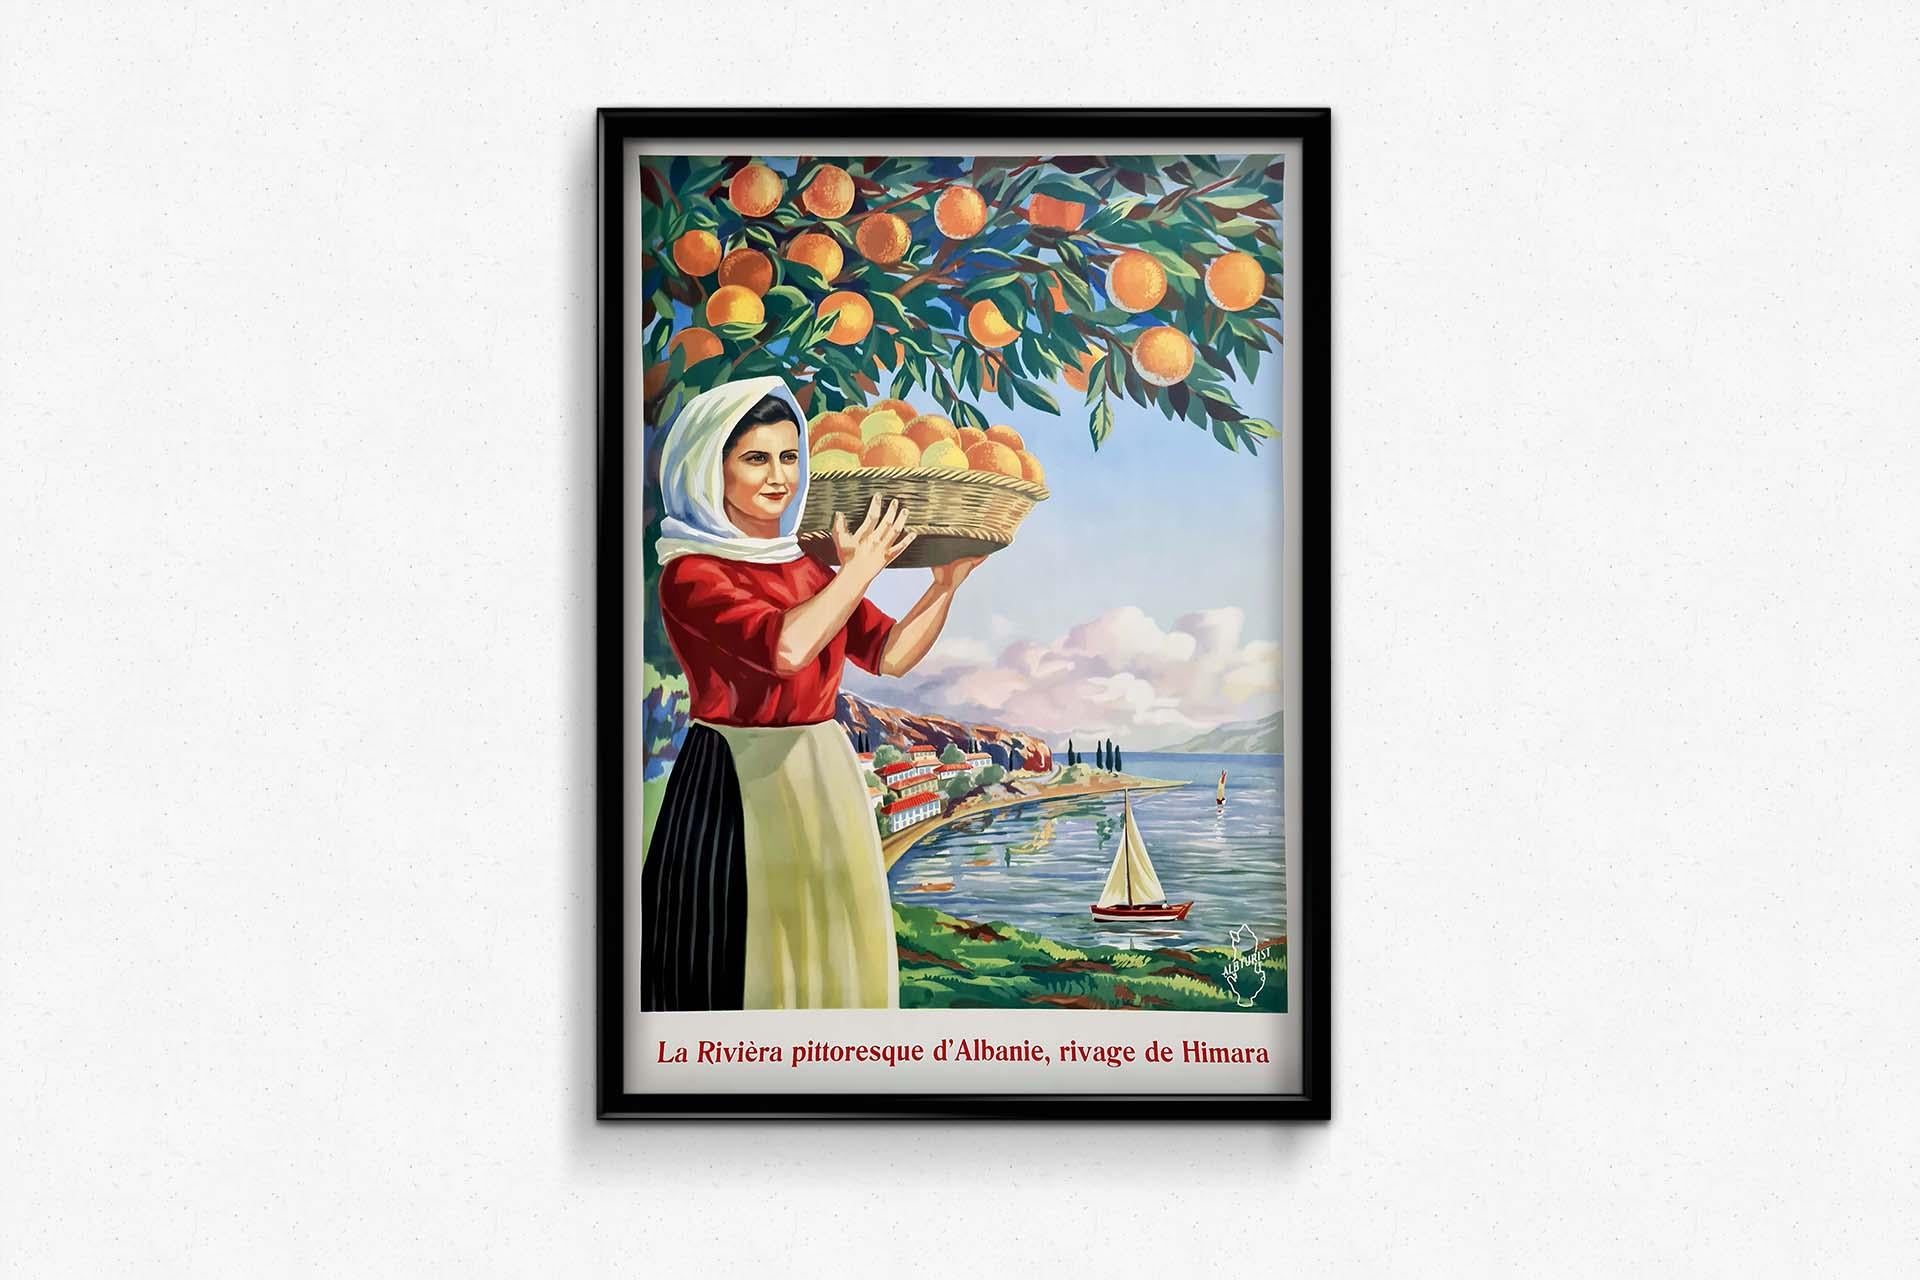 Beautiful travel poster for Albania, written in French. The poster depicts a woman holding a basket of fruit, overlooking the shores of Himarë. Himarë or Himara is a municipality in southern Albania in the district of Vlorë on the Ionian